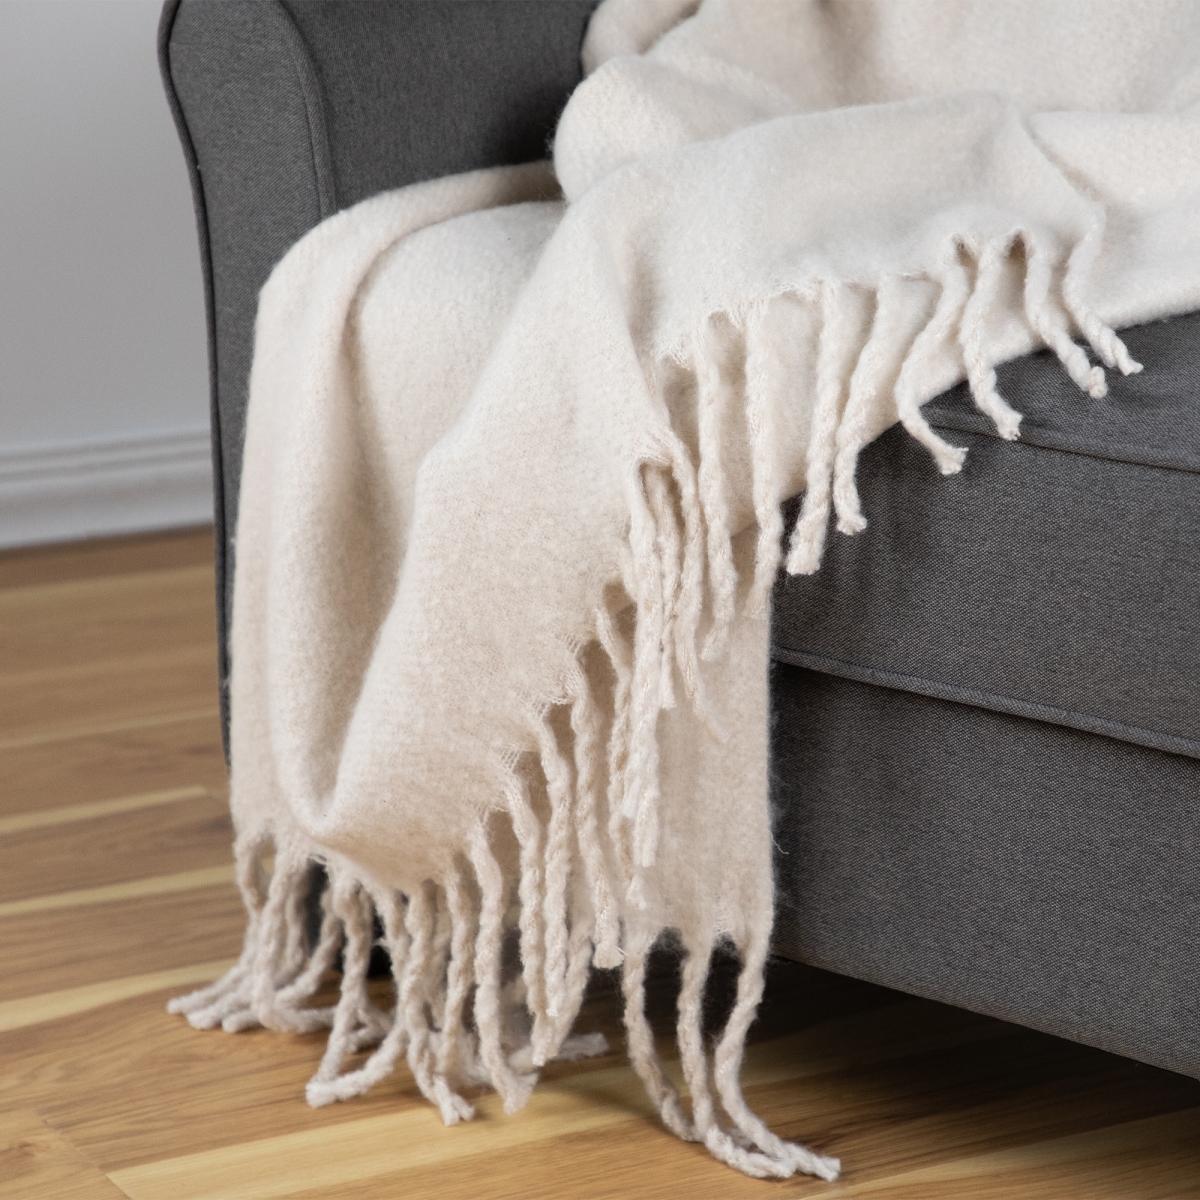 Picture of Northlight 35702148 50 x 60 in. Cream Brushed Woven Throw Blanket with Fringe